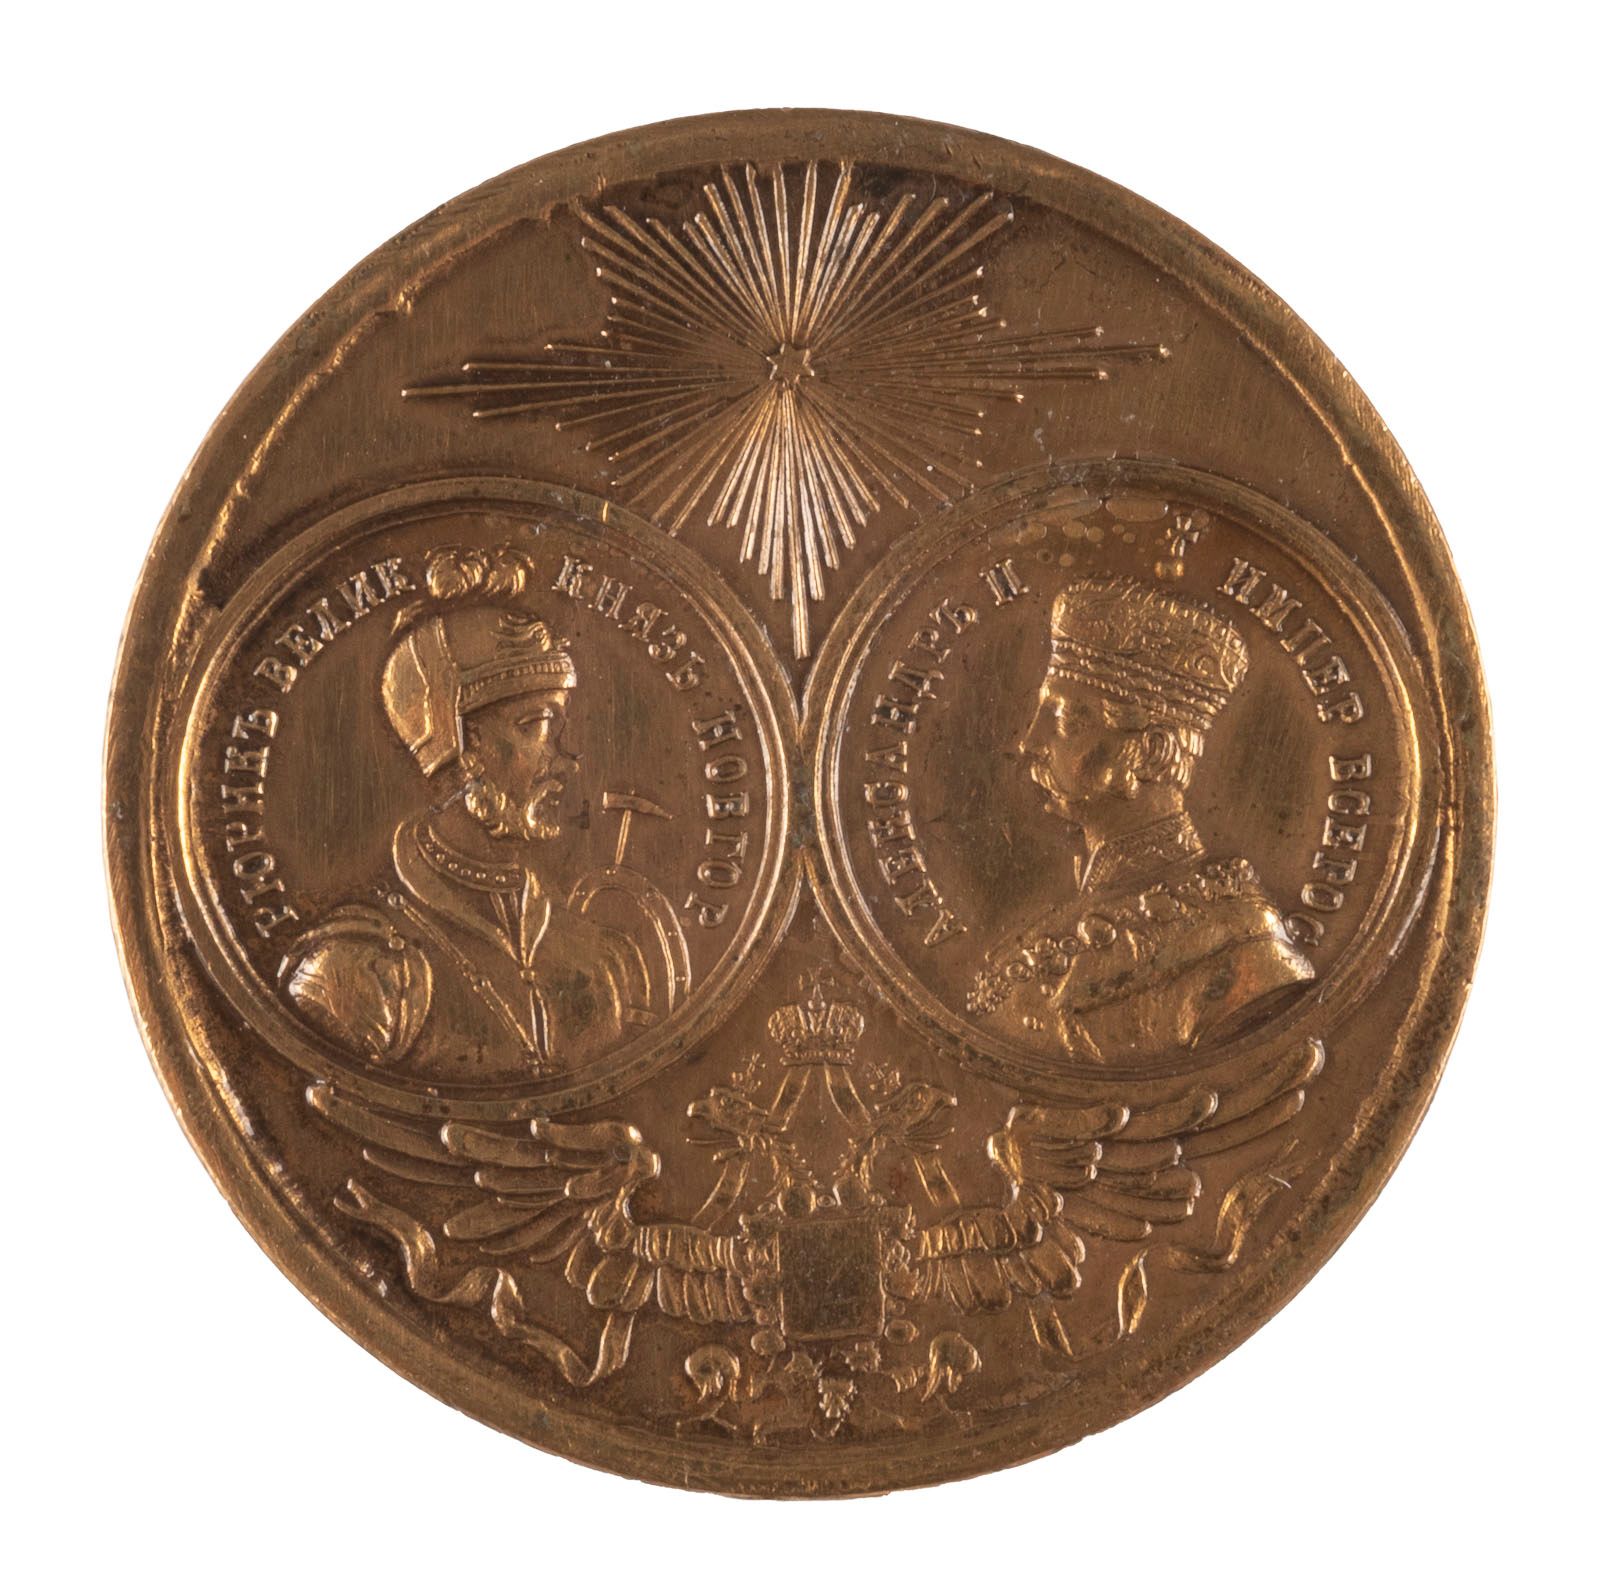 A MEDAL COMMEMORATING THE UNVEILING OF THE MONUMENT TO MARK 纪念诺夫哥罗德俄罗斯国家千年纪念碑揭幕的&hellip;